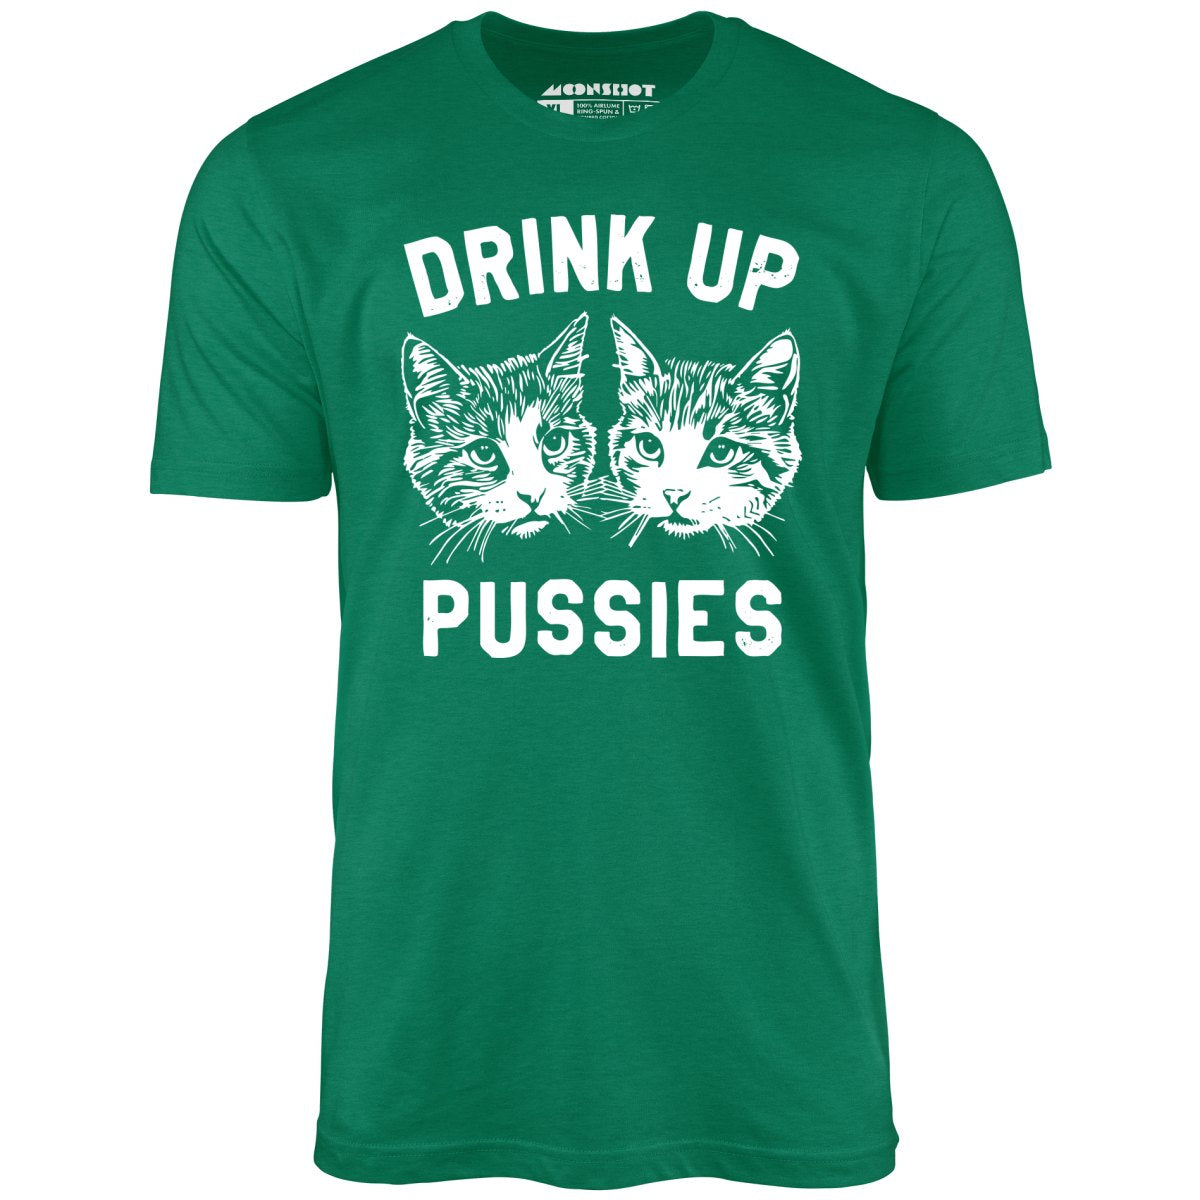 Drink Up Pussies - Unisex T-Shirt